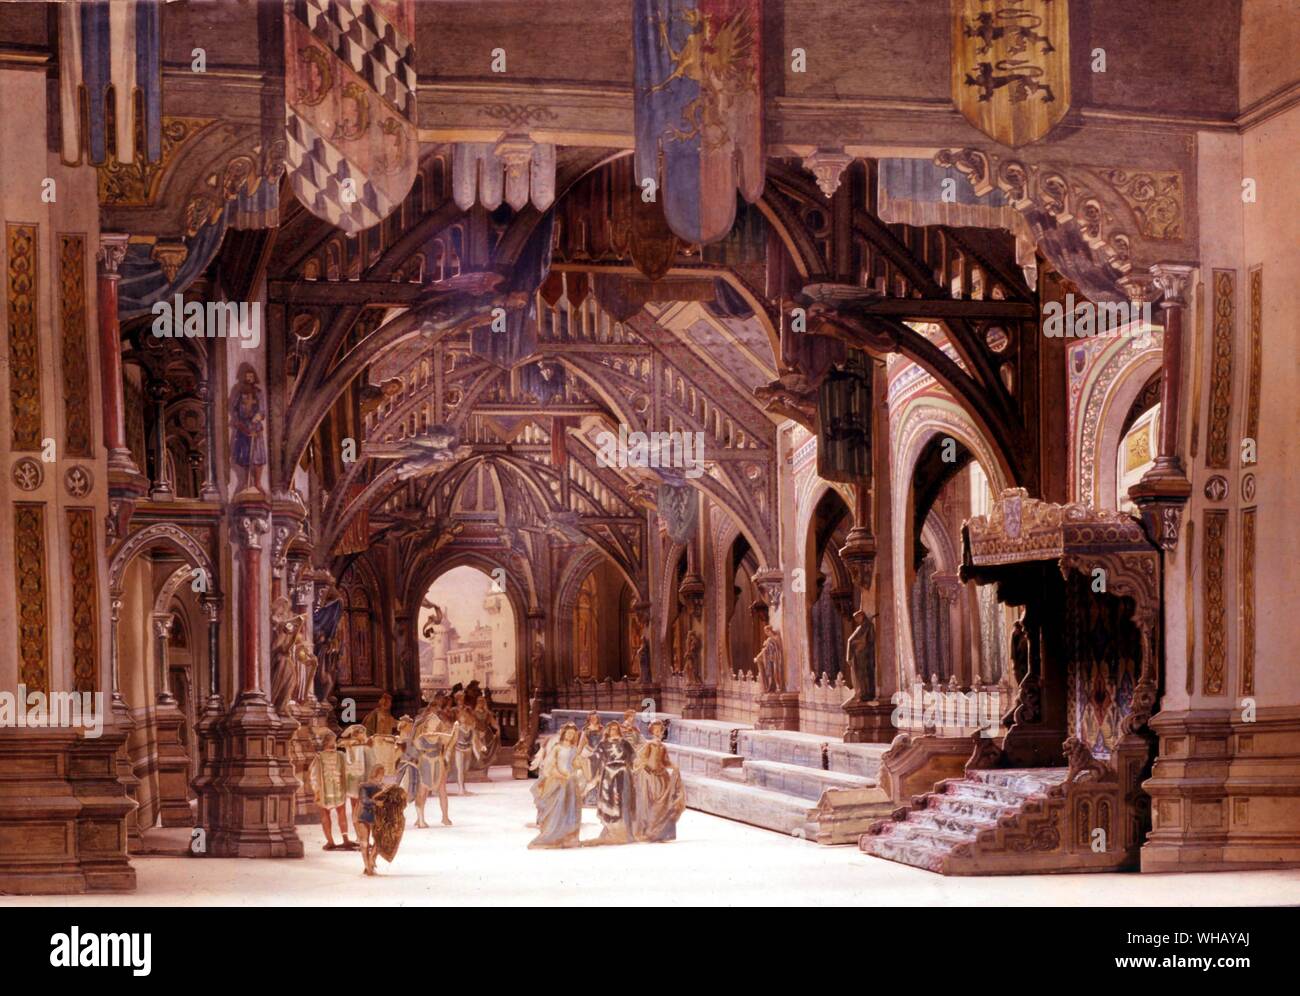 Stage model for Tannhäuser (Tannhaeuser) Set. Opera in Three Acts. Libretto and Music: Richard Wagner (1813-1883). The Dream King by Wilfrid Blunt and James Russell, page 74.. According to German legend, Tannhäuser was a knight and poet, who found the Venusburg, or subterranean home of Venus. He spent a year there worshipping Venus.. Stock Photo